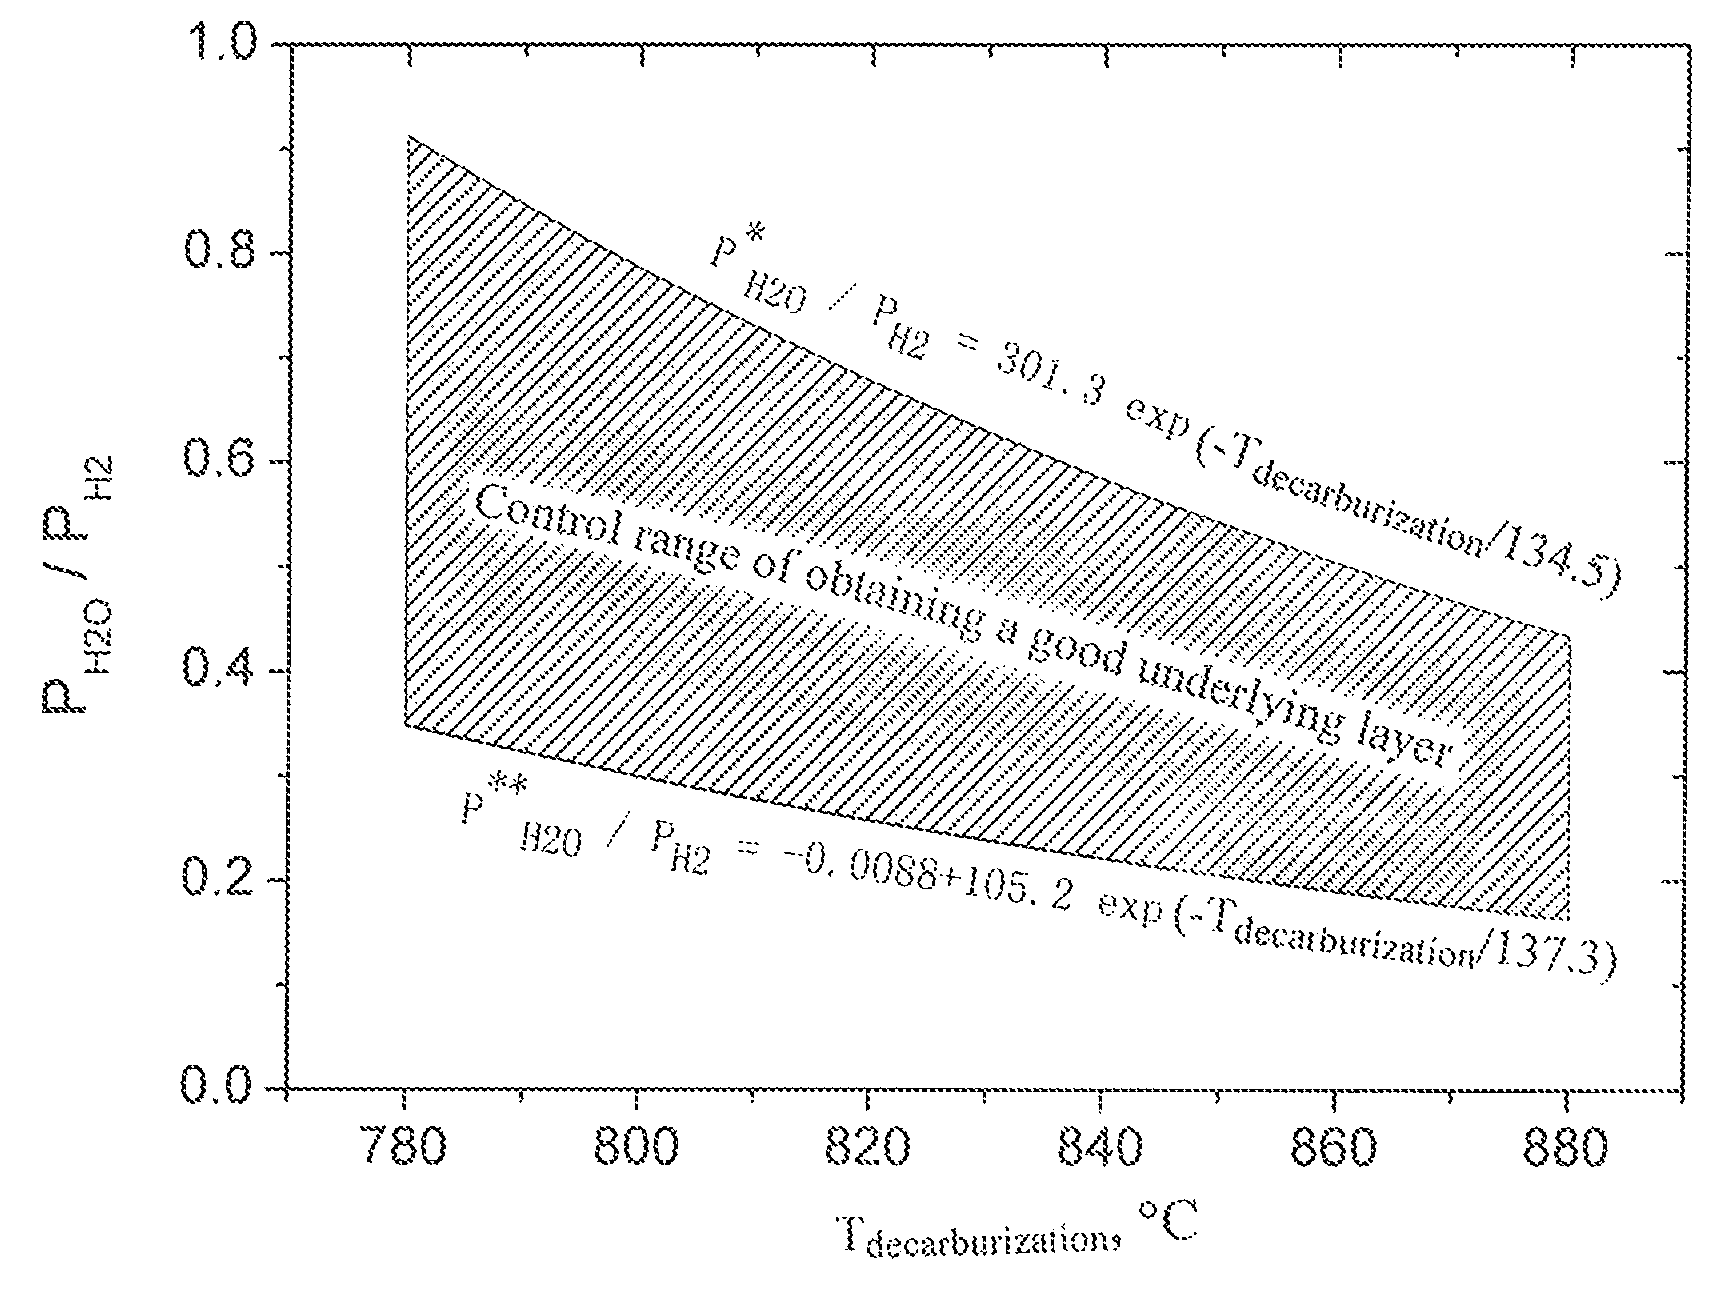 Method for manufacturing grain-oriented silicon steel with single cold rolling